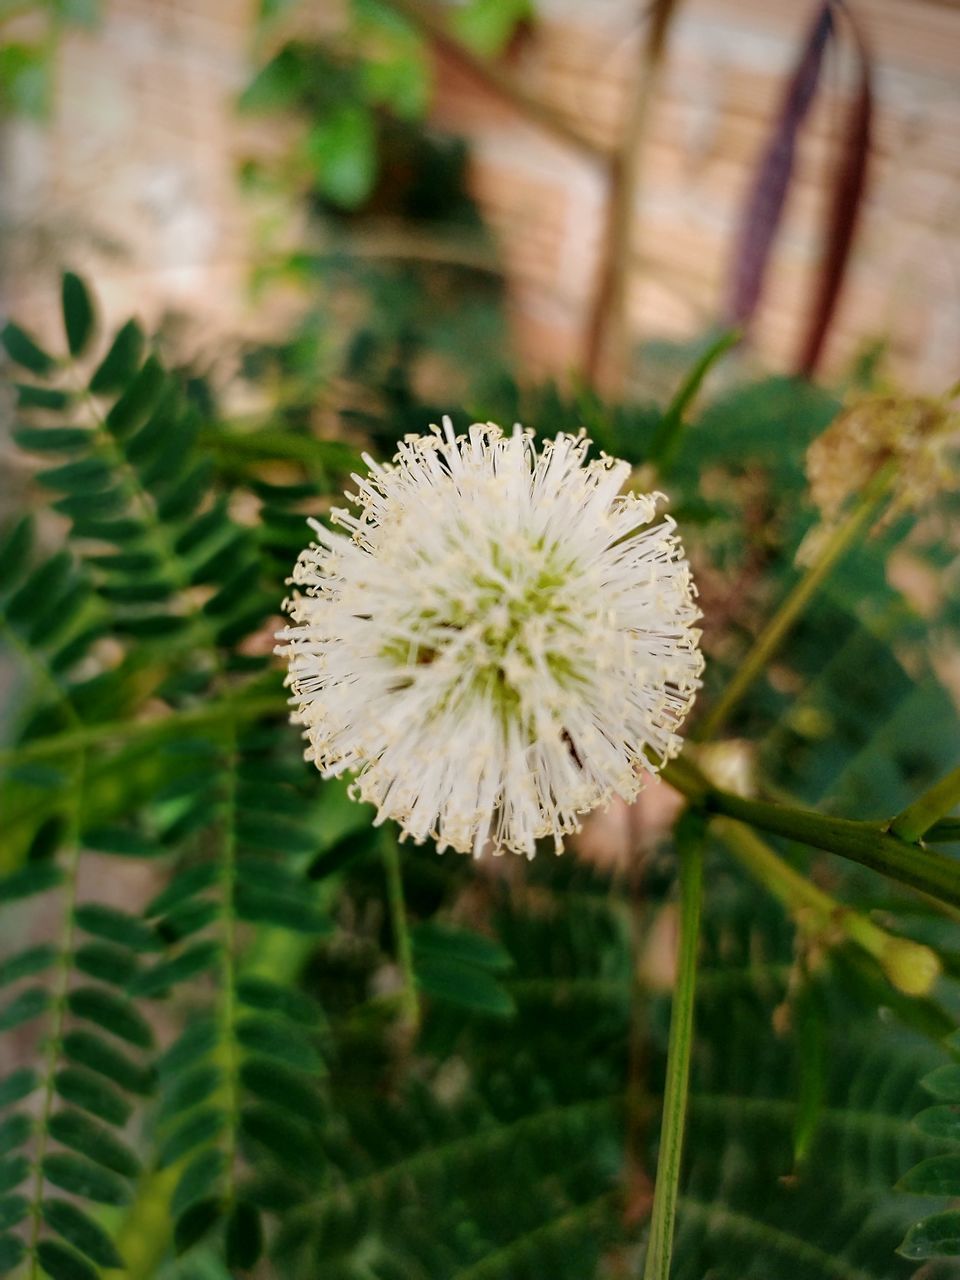 CLOSE-UP OF WHITE FLOWERING PLANT